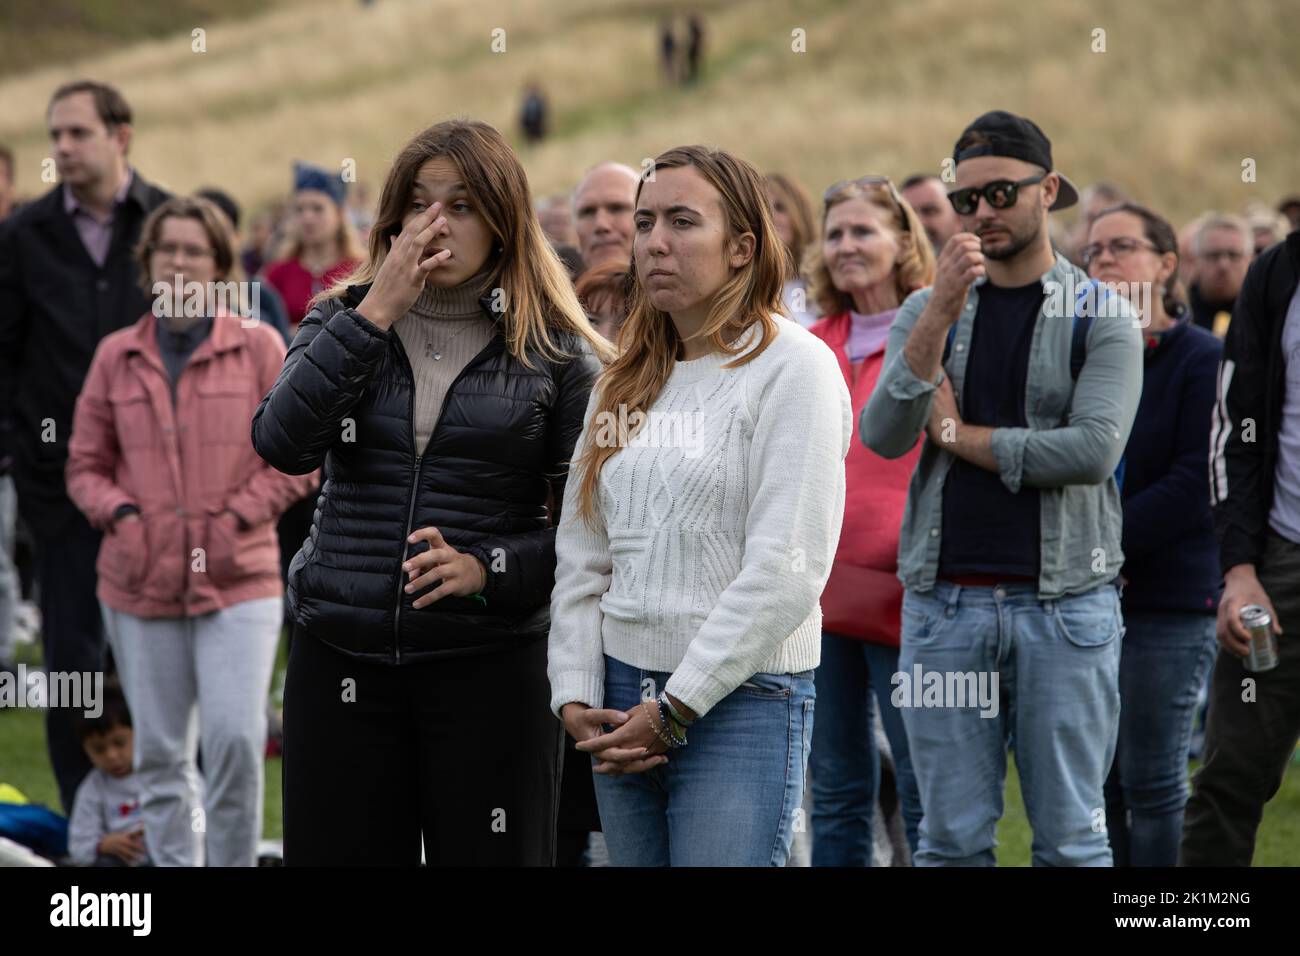 Edinburgh Scotland, 19 September 2022. In Holyrood Park, in front of the Royal family’s Palace of Holyroodhouse, crowds stand for 2-minutes silence as they watch on a large screen the funeral in London of Her Majesty Queen Elizabeth II who died on 8th September, in Edinburgh Scotland, 19 September 2022. Photo credit: Jeremy Sutton-Hibbert/Alamy Live News. Stock Photo